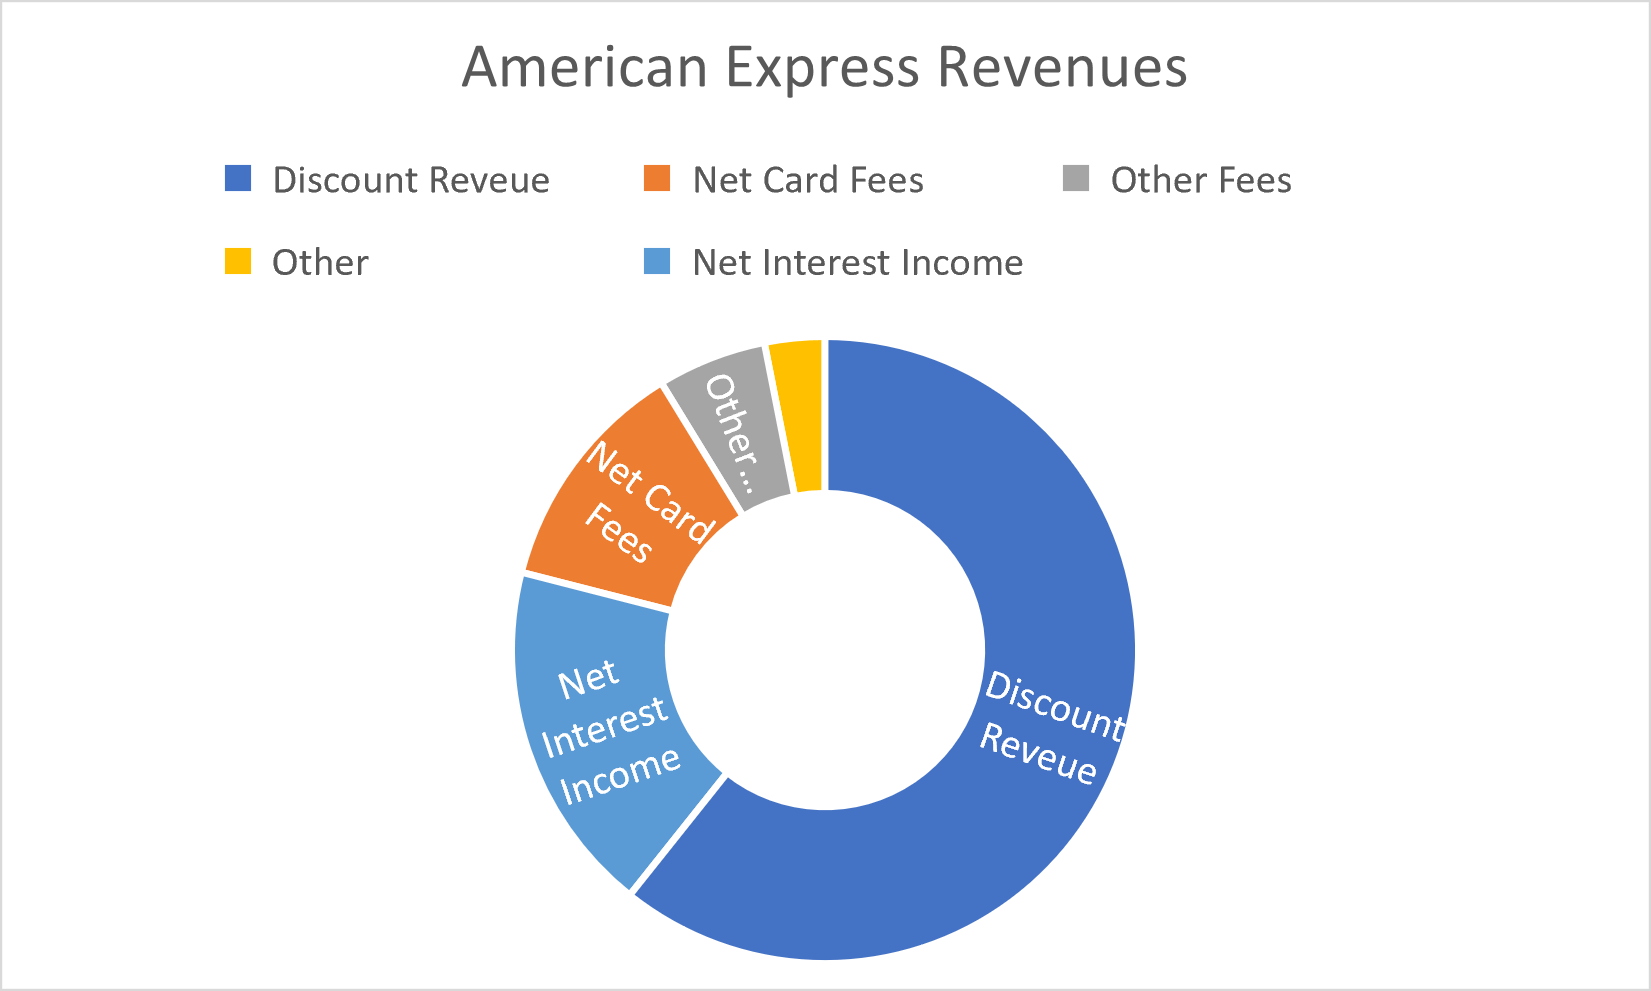 Win for Amex against black card competitor